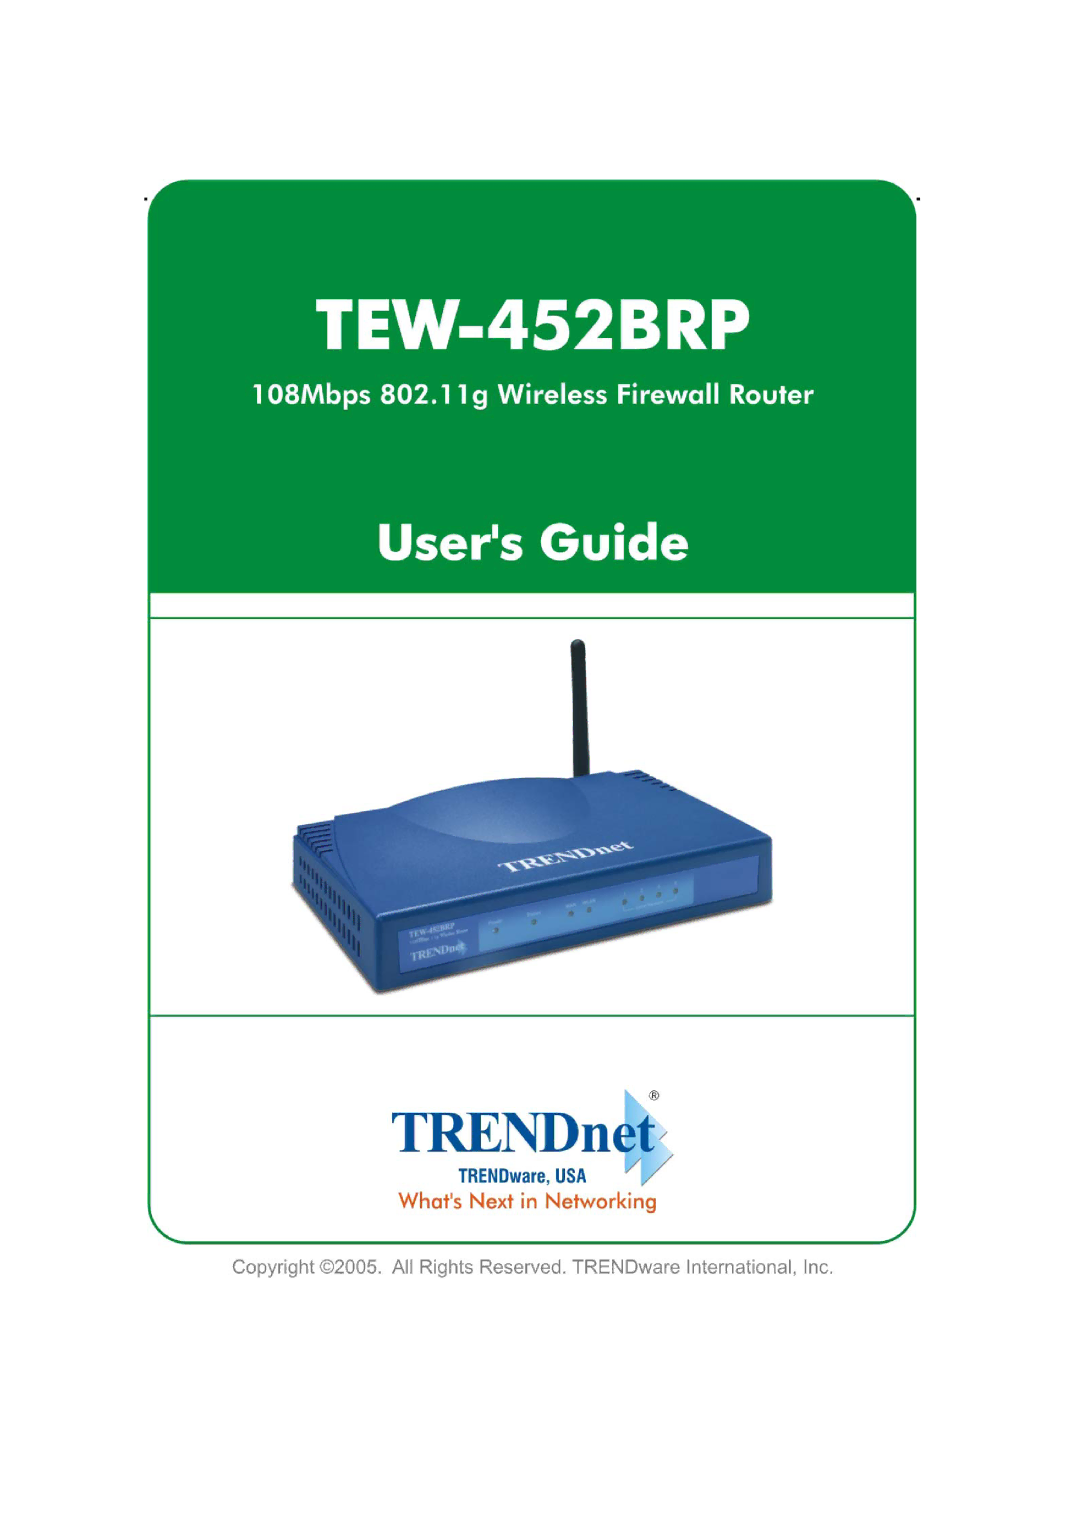 TRENDnet 108Mbps 802.11g Wireless Firewall Router, TEW-452BRP manual 